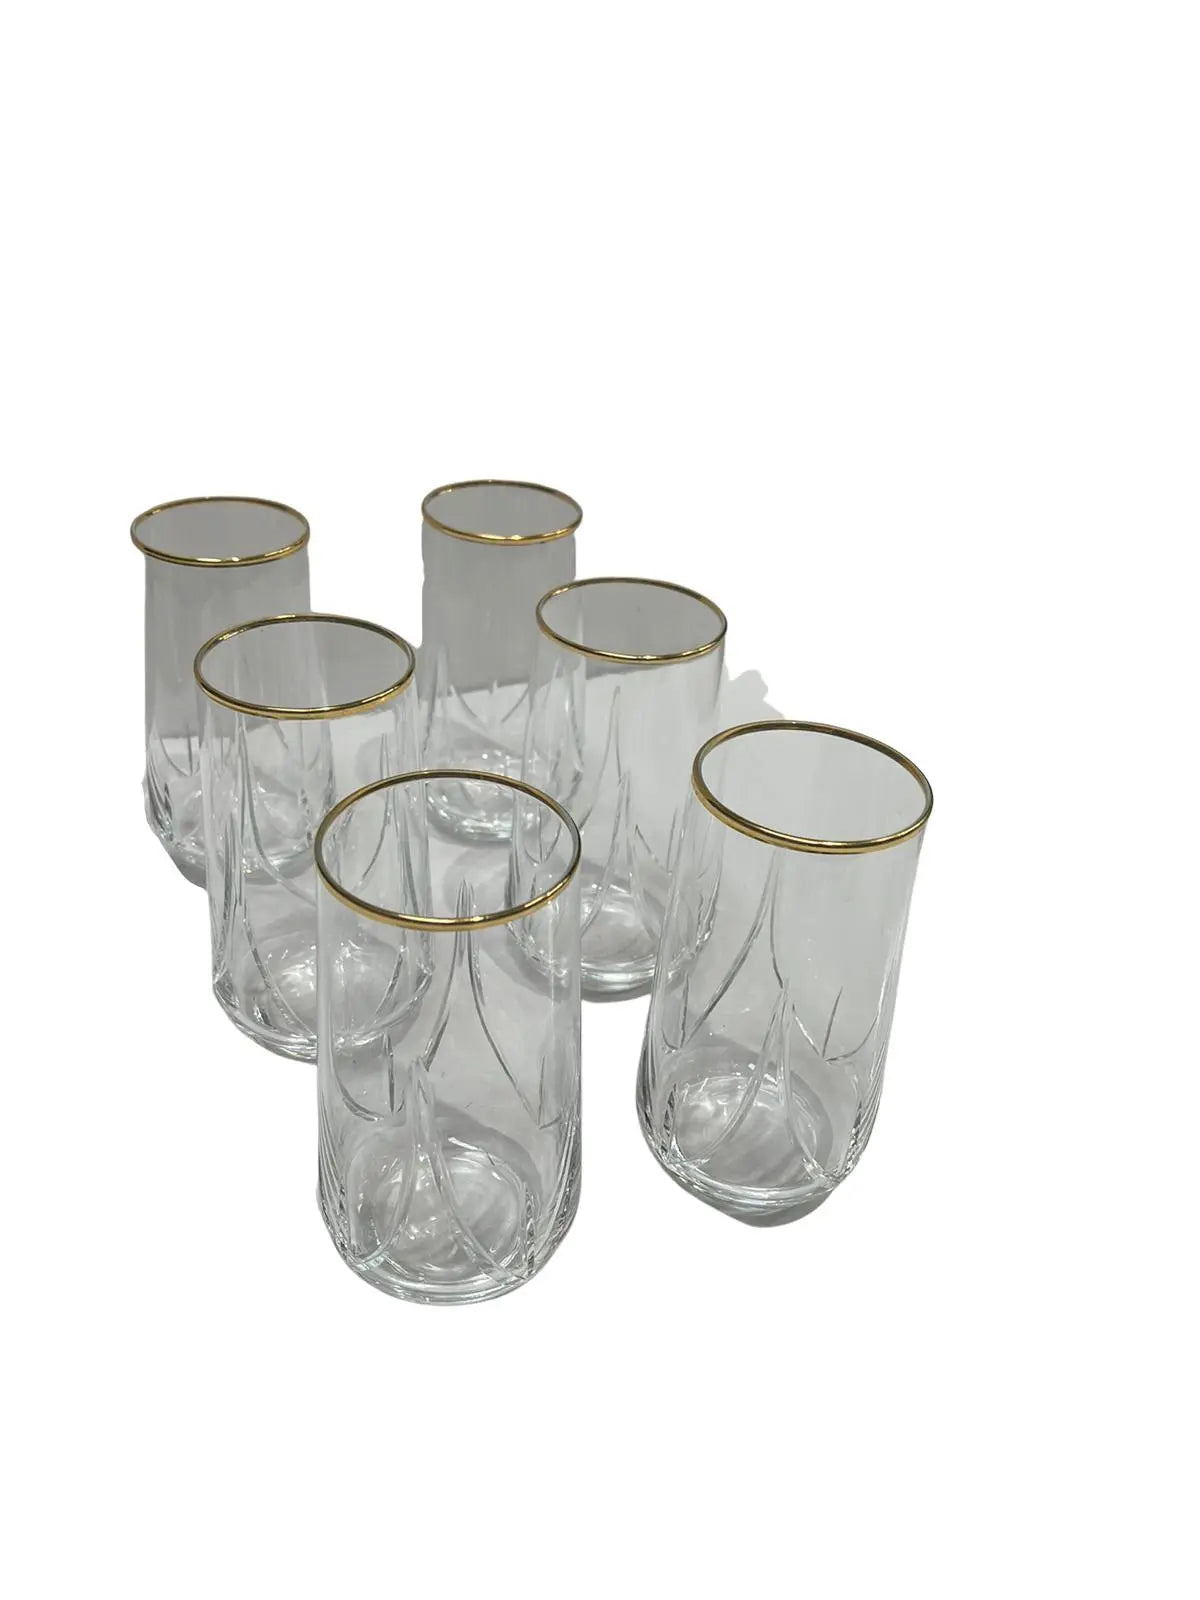 Tall Drinking Clear Glass Set Patterned and Thick Gold Band 6pcs LAL376 -  Armani Gallery -  Armani Gallery